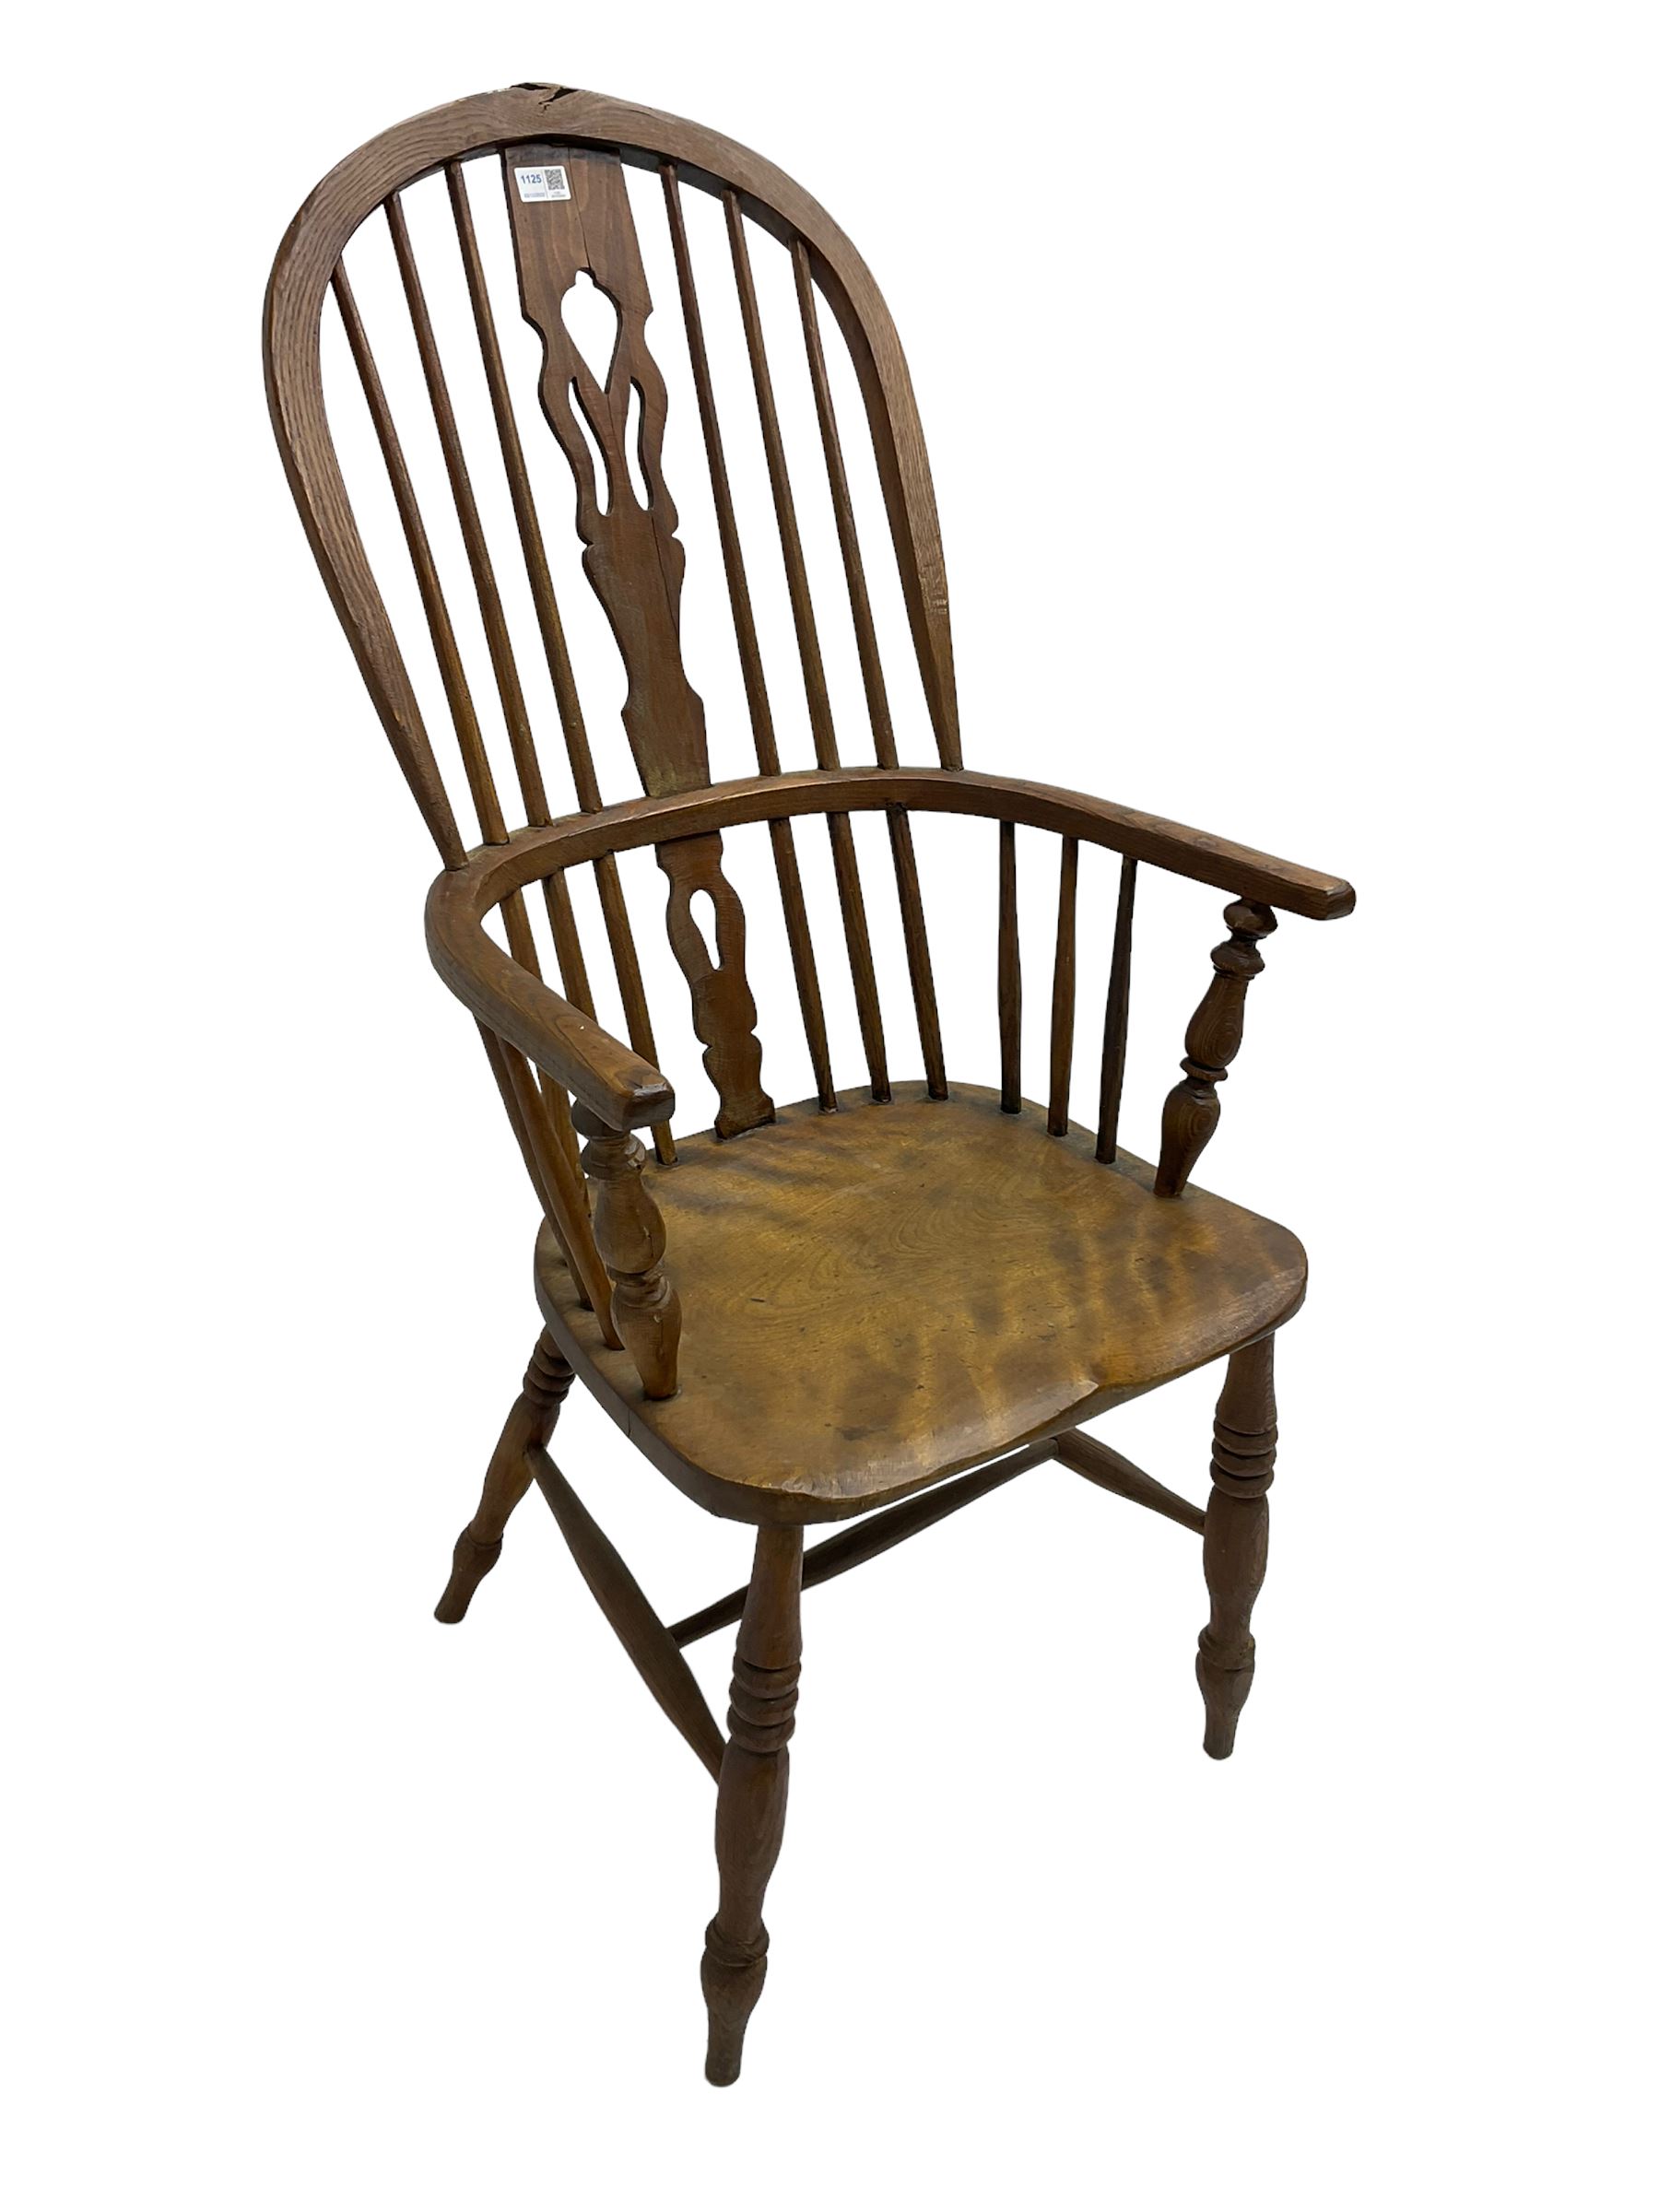 19th century elm and beech Windsor armchair - Image 5 of 6